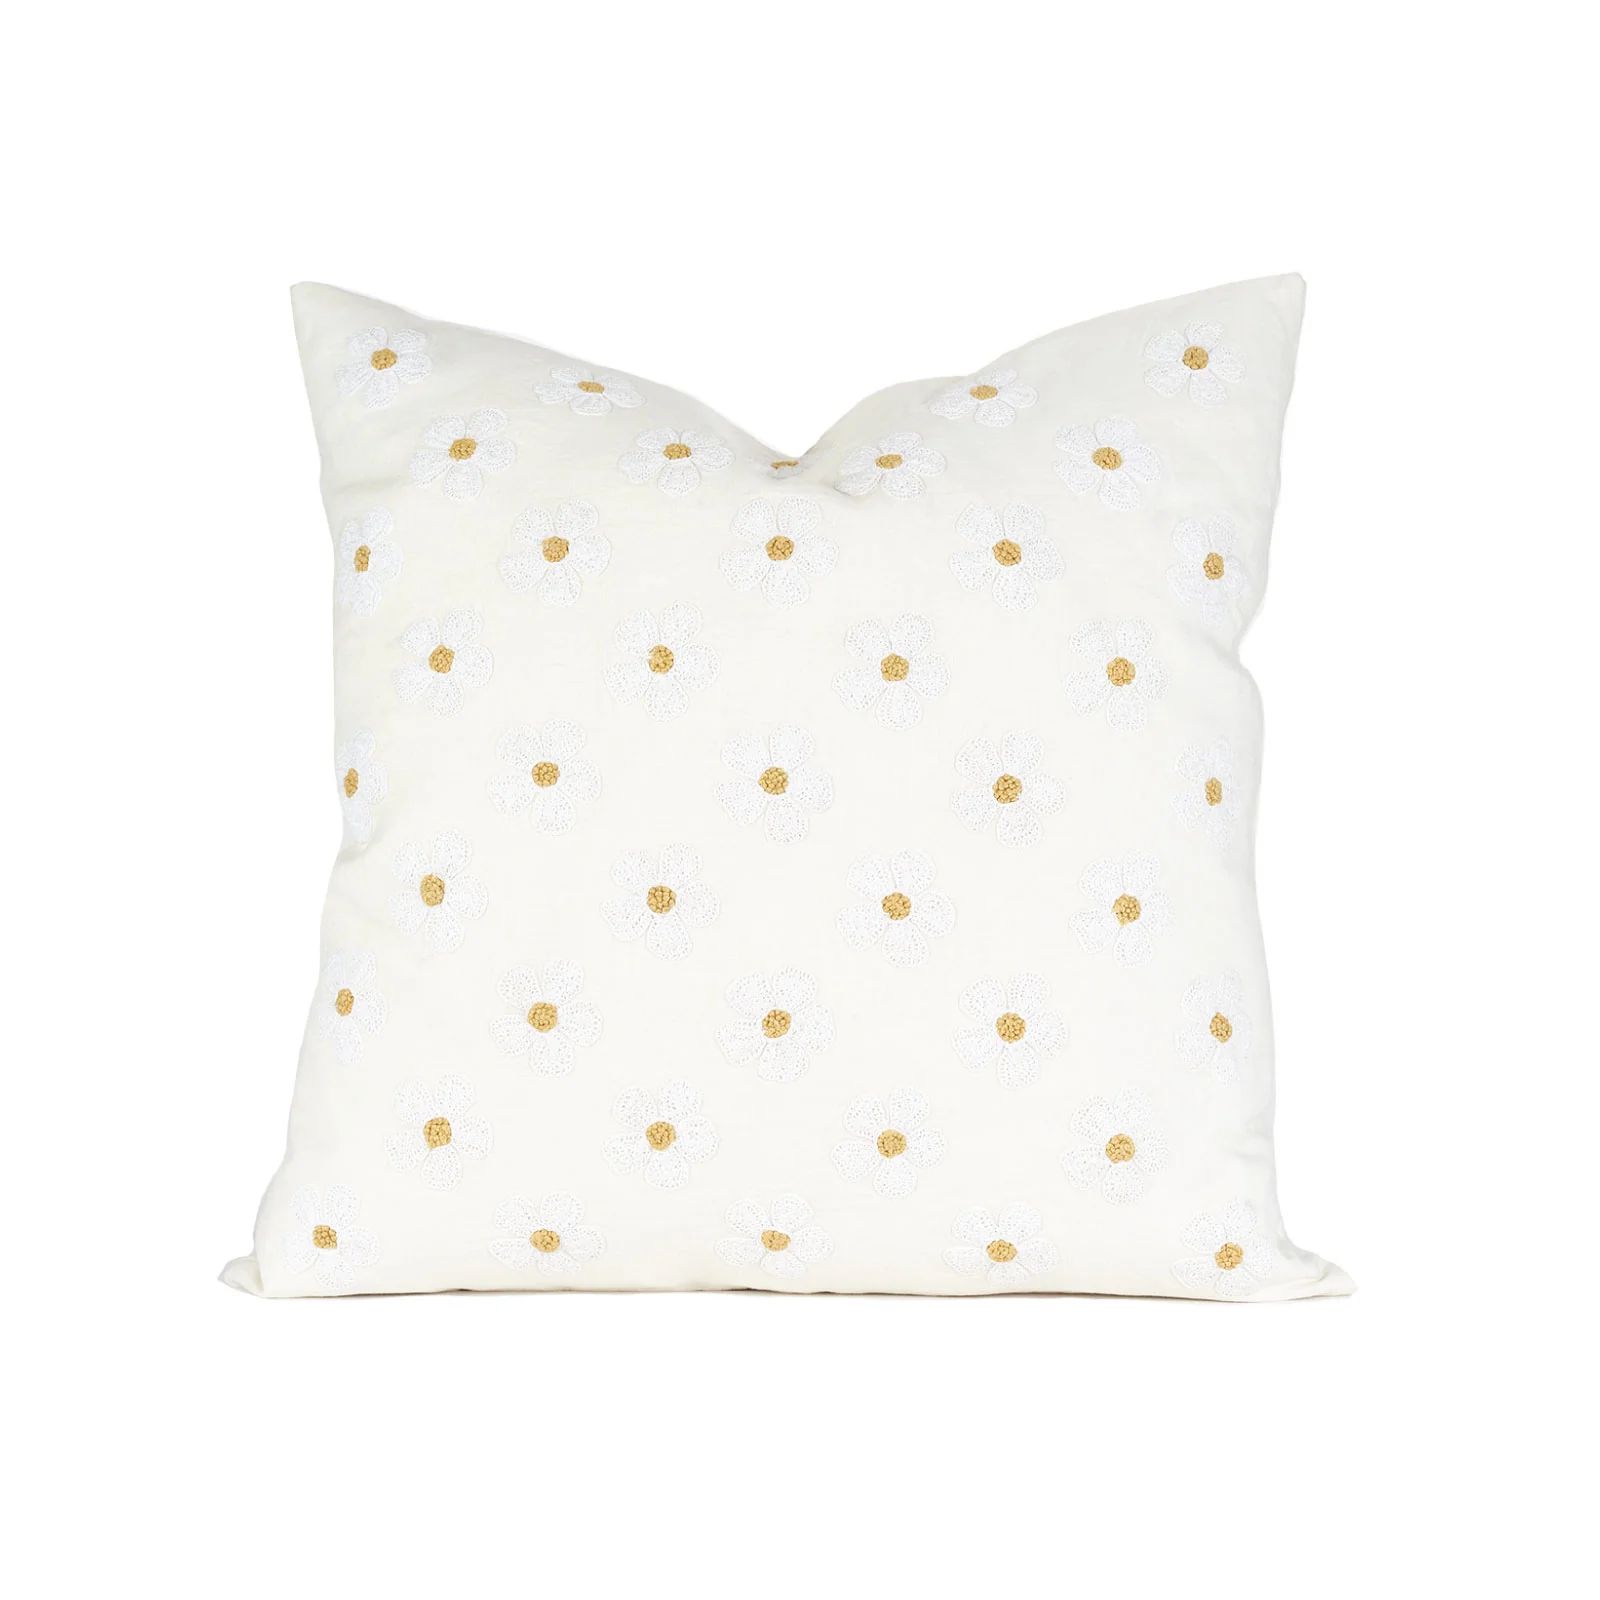 Daisy Embroidered Pillow | Brooke and Lou